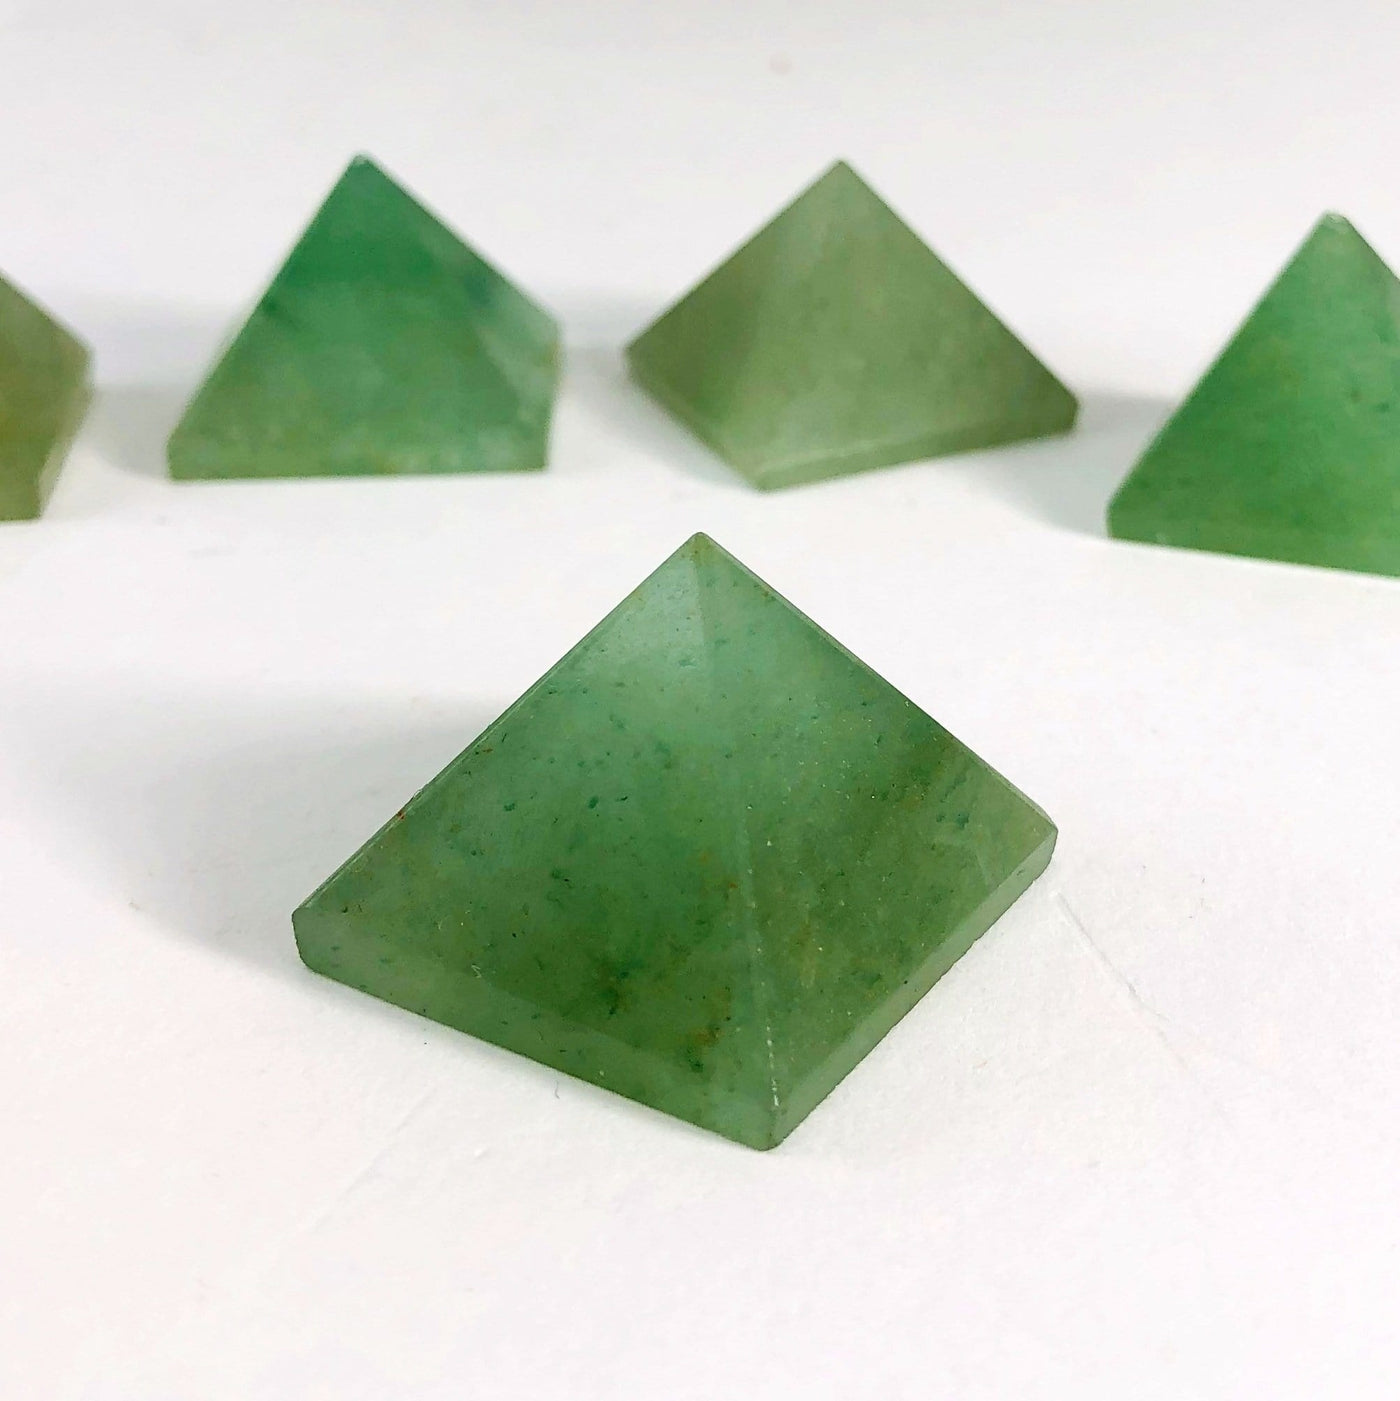 Green Aventurine Pyramids in a row with one up close